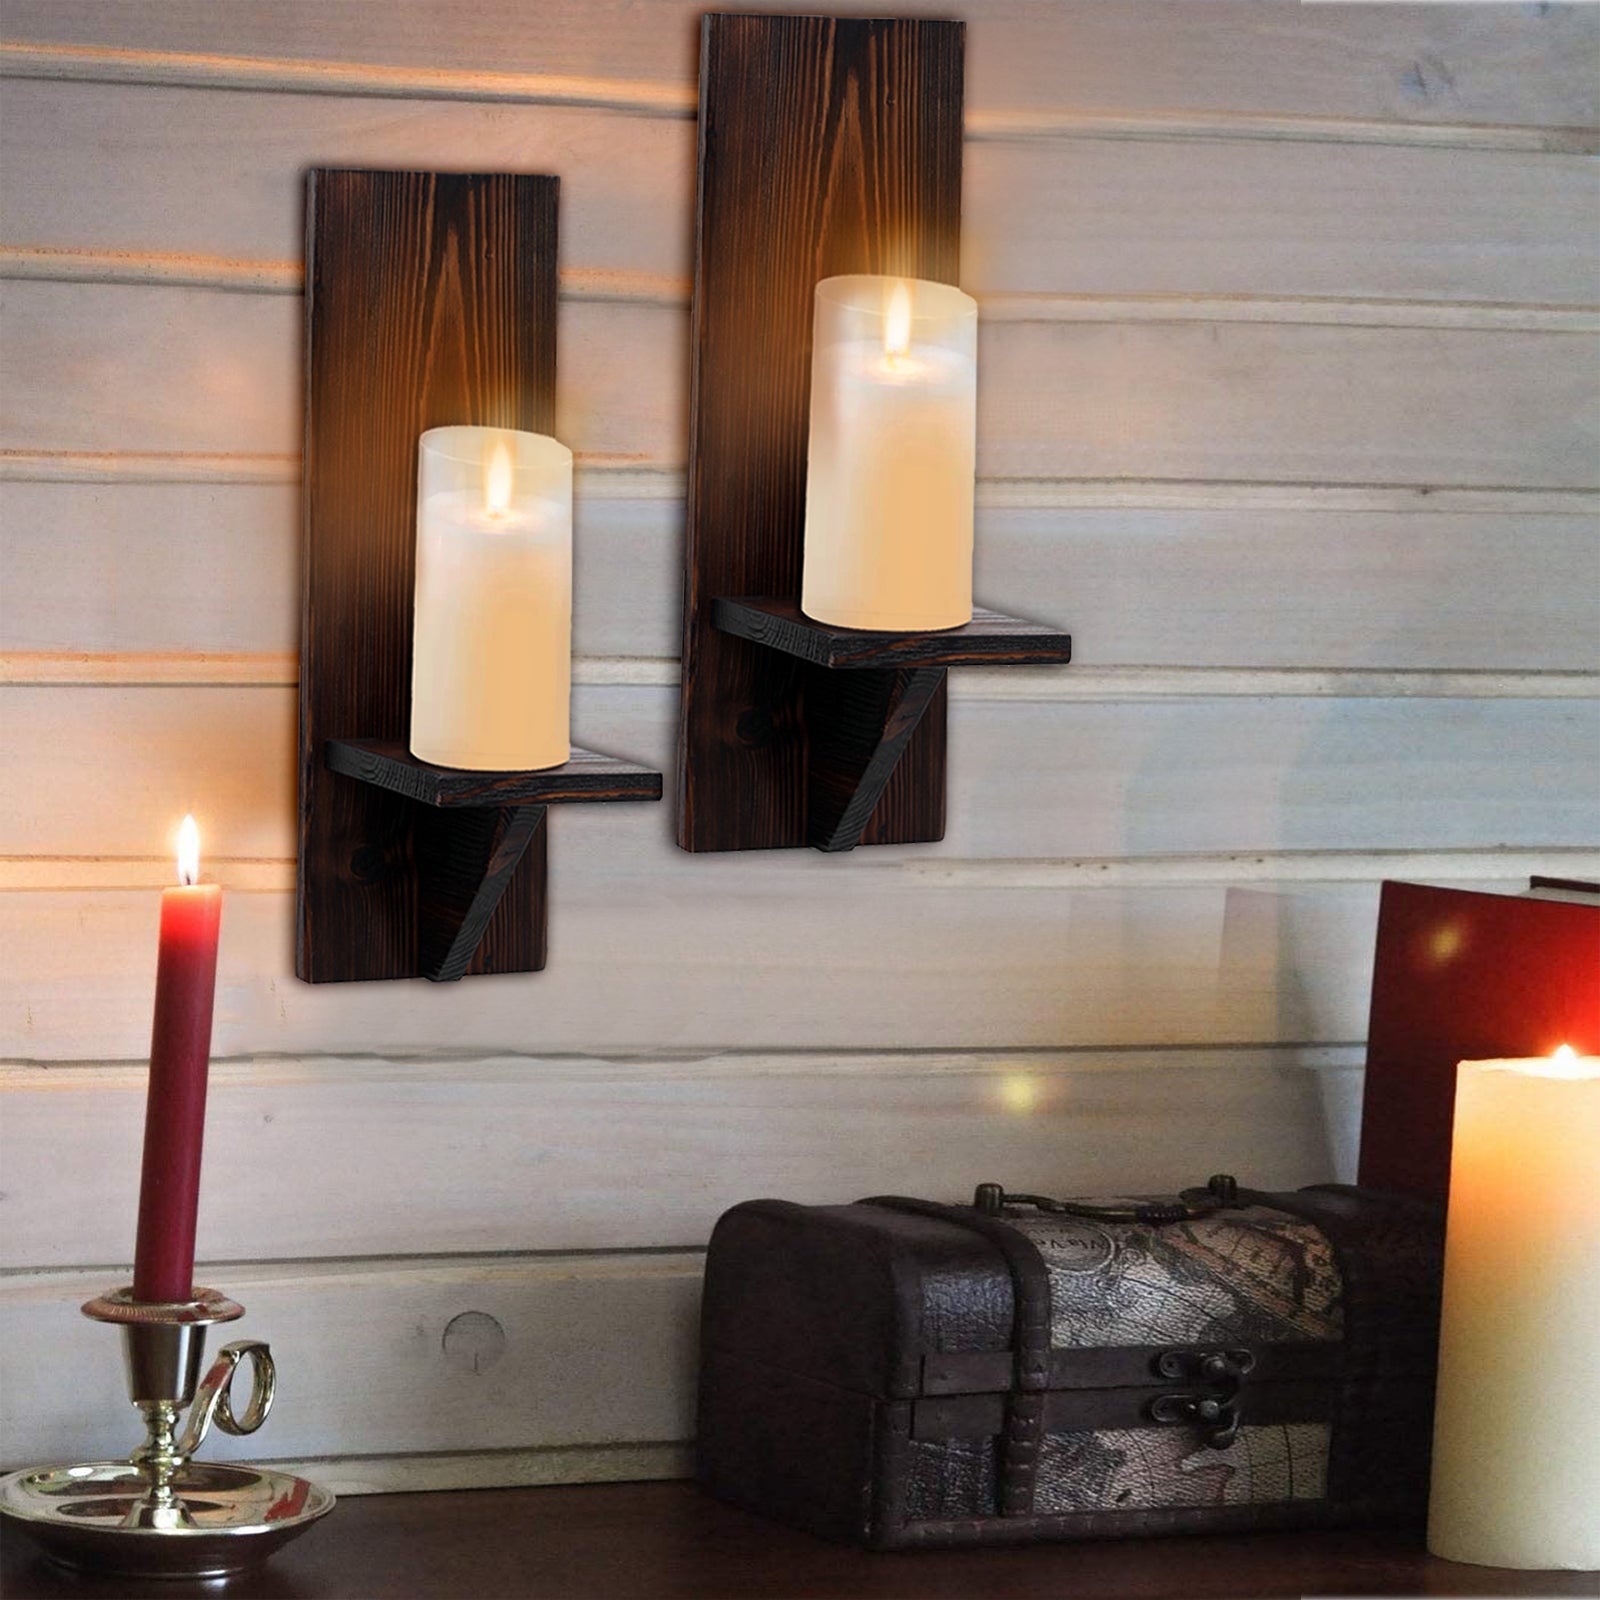 2 Dawn Lily Double Candle Wall Sconces - Multi - Bed Bath & Beyond -  19454259